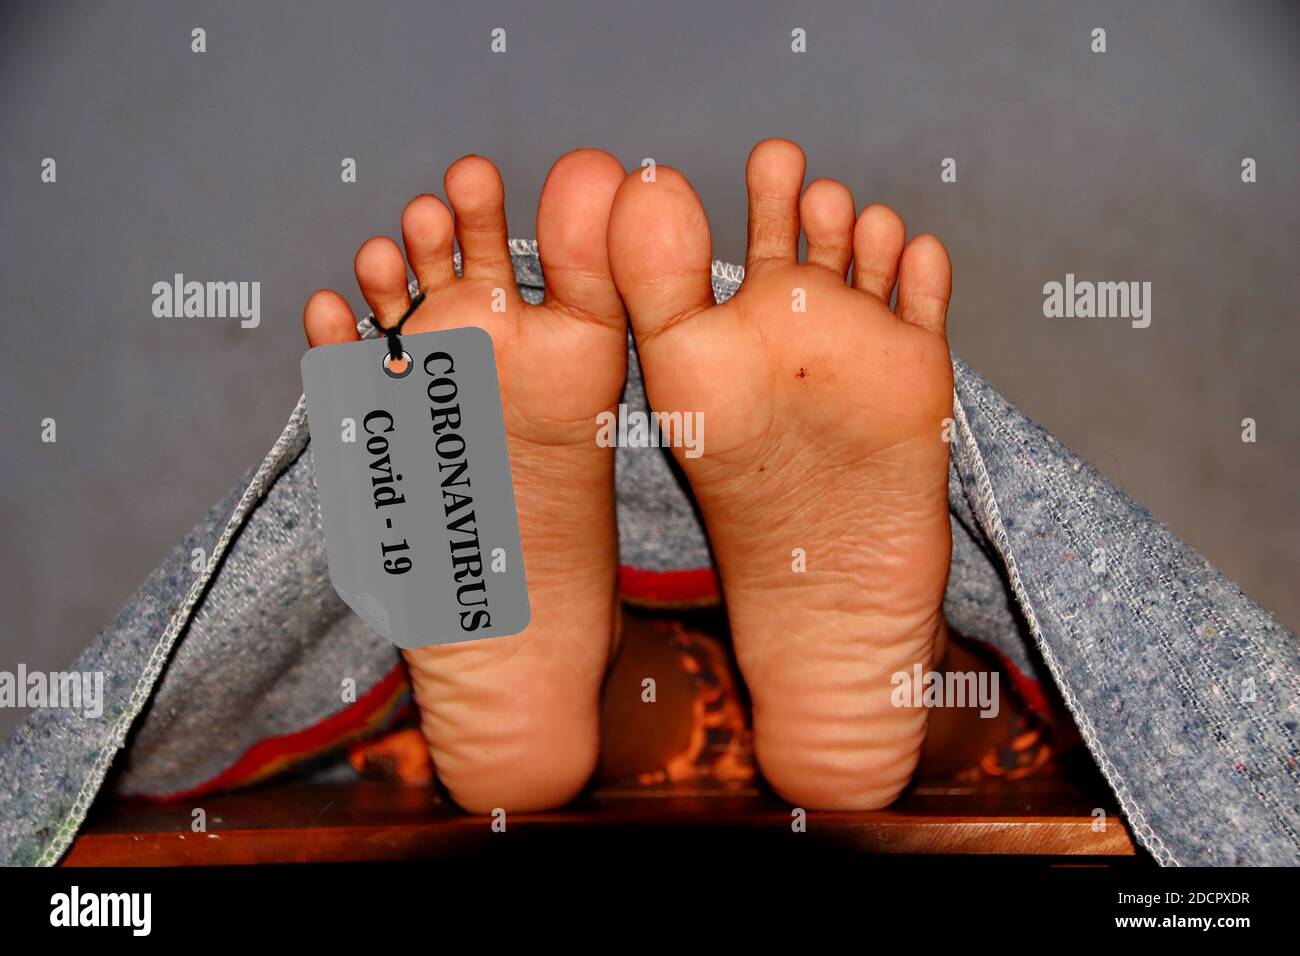 Not focus and noise image, concept imitation morgue, coronavirus victim killed by 2019-ncov, legs of a corpse on a table, people died Stock Photo